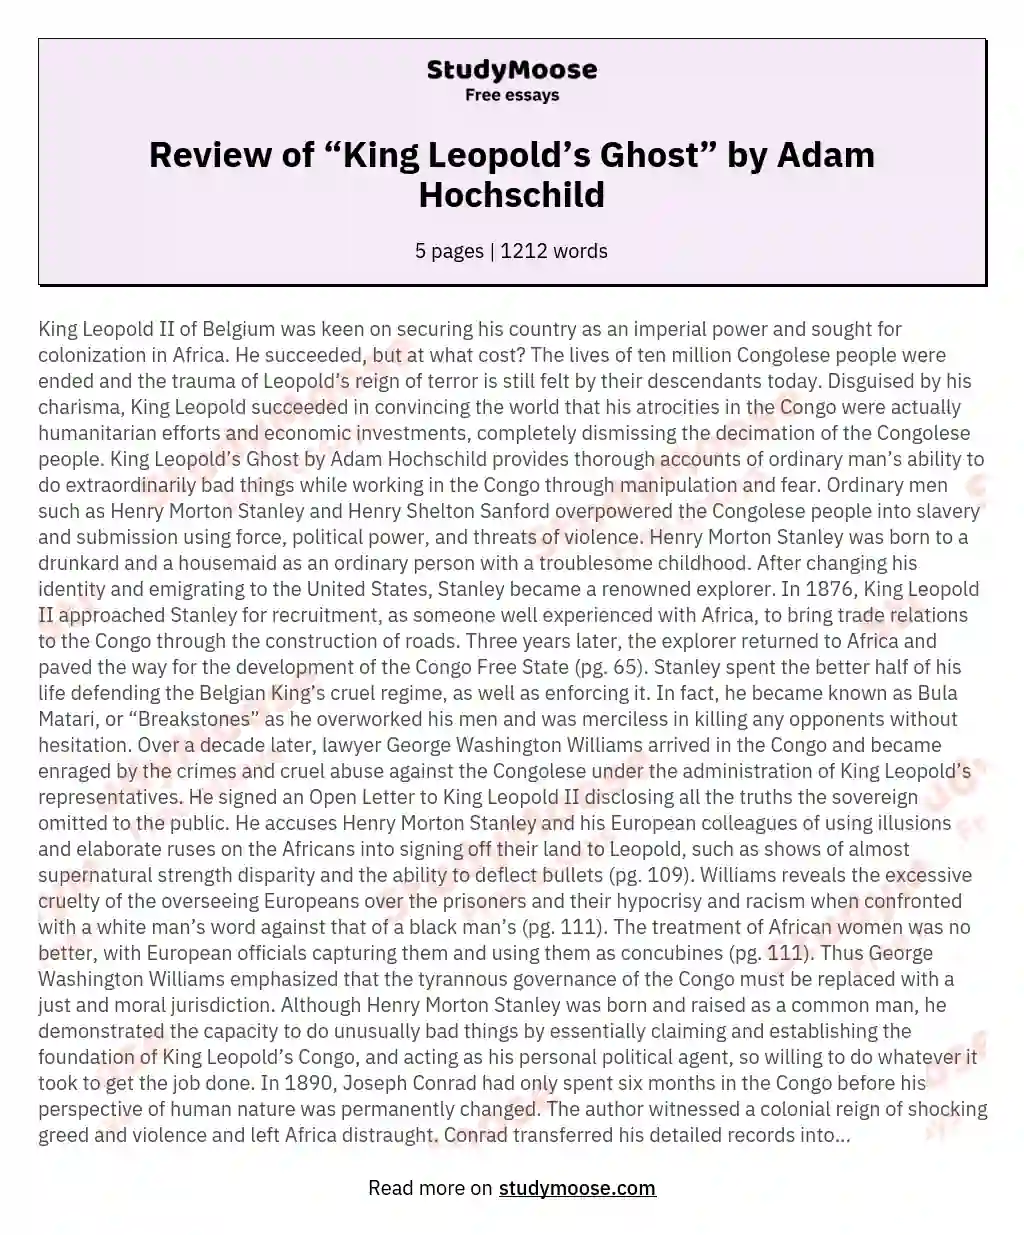 Review of “King Leopold’s Ghost” by Adam Hochschild essay